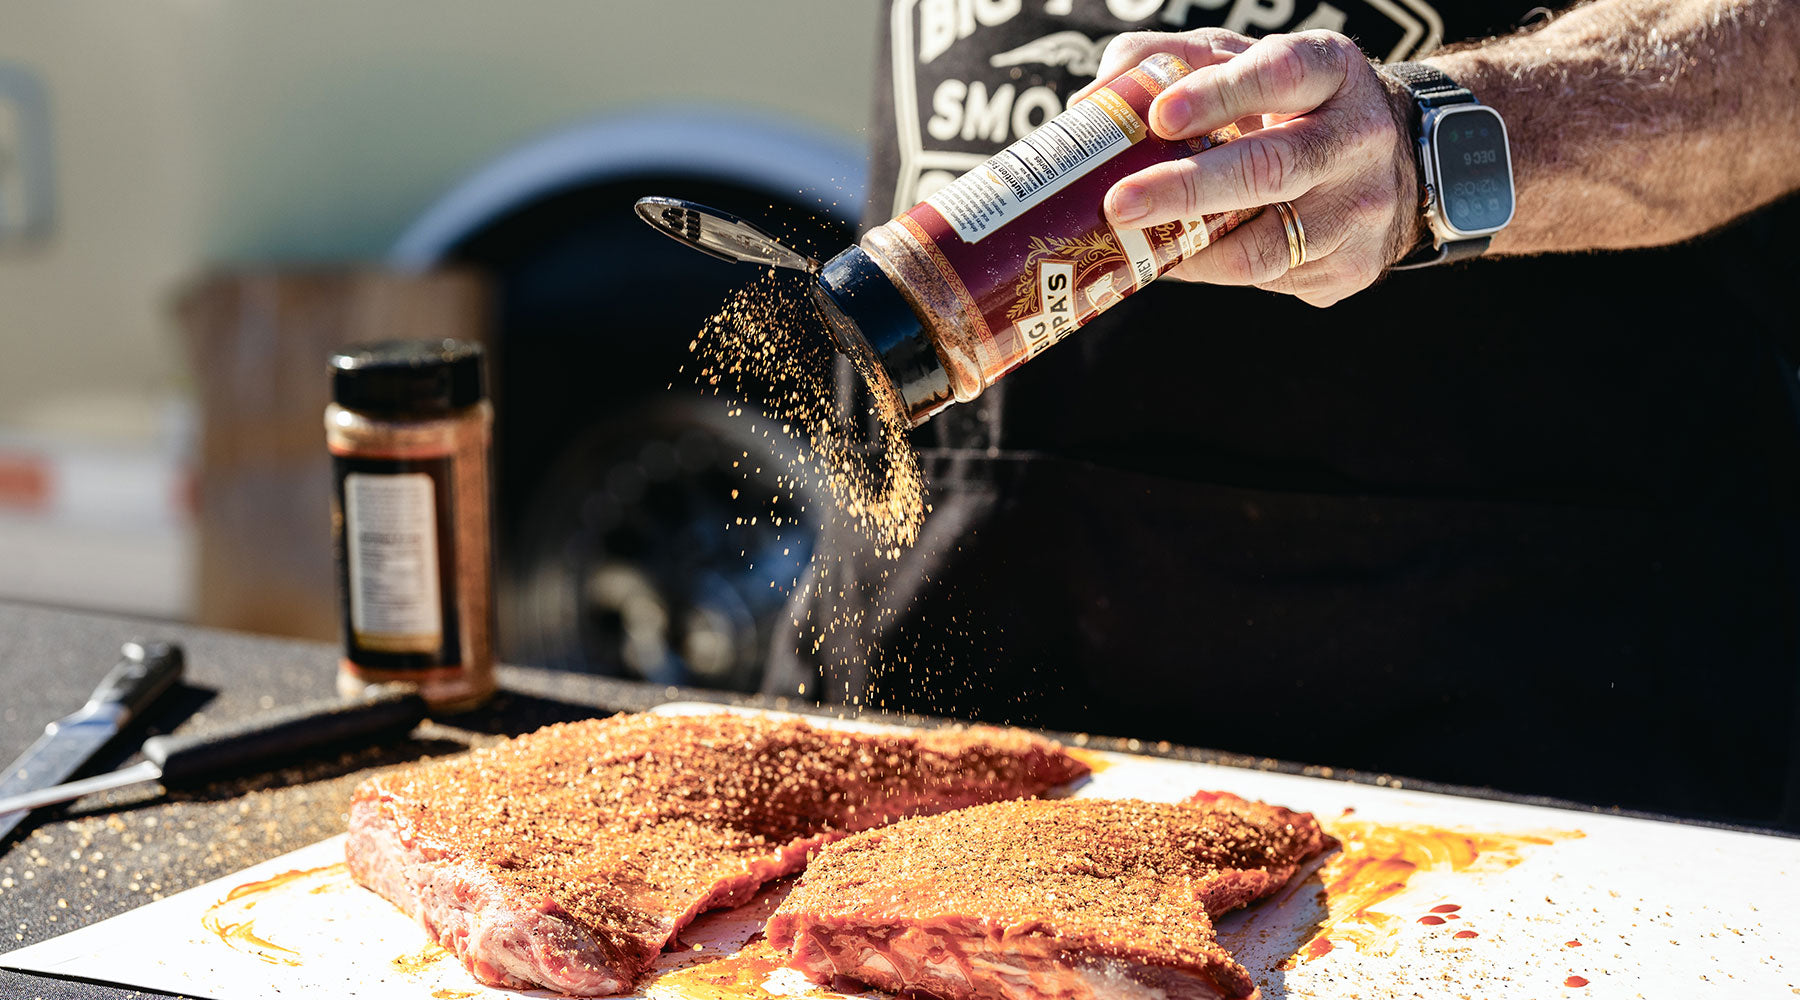 You Ask, We Answer: Do You Add Seasoning Before or After Grilling?